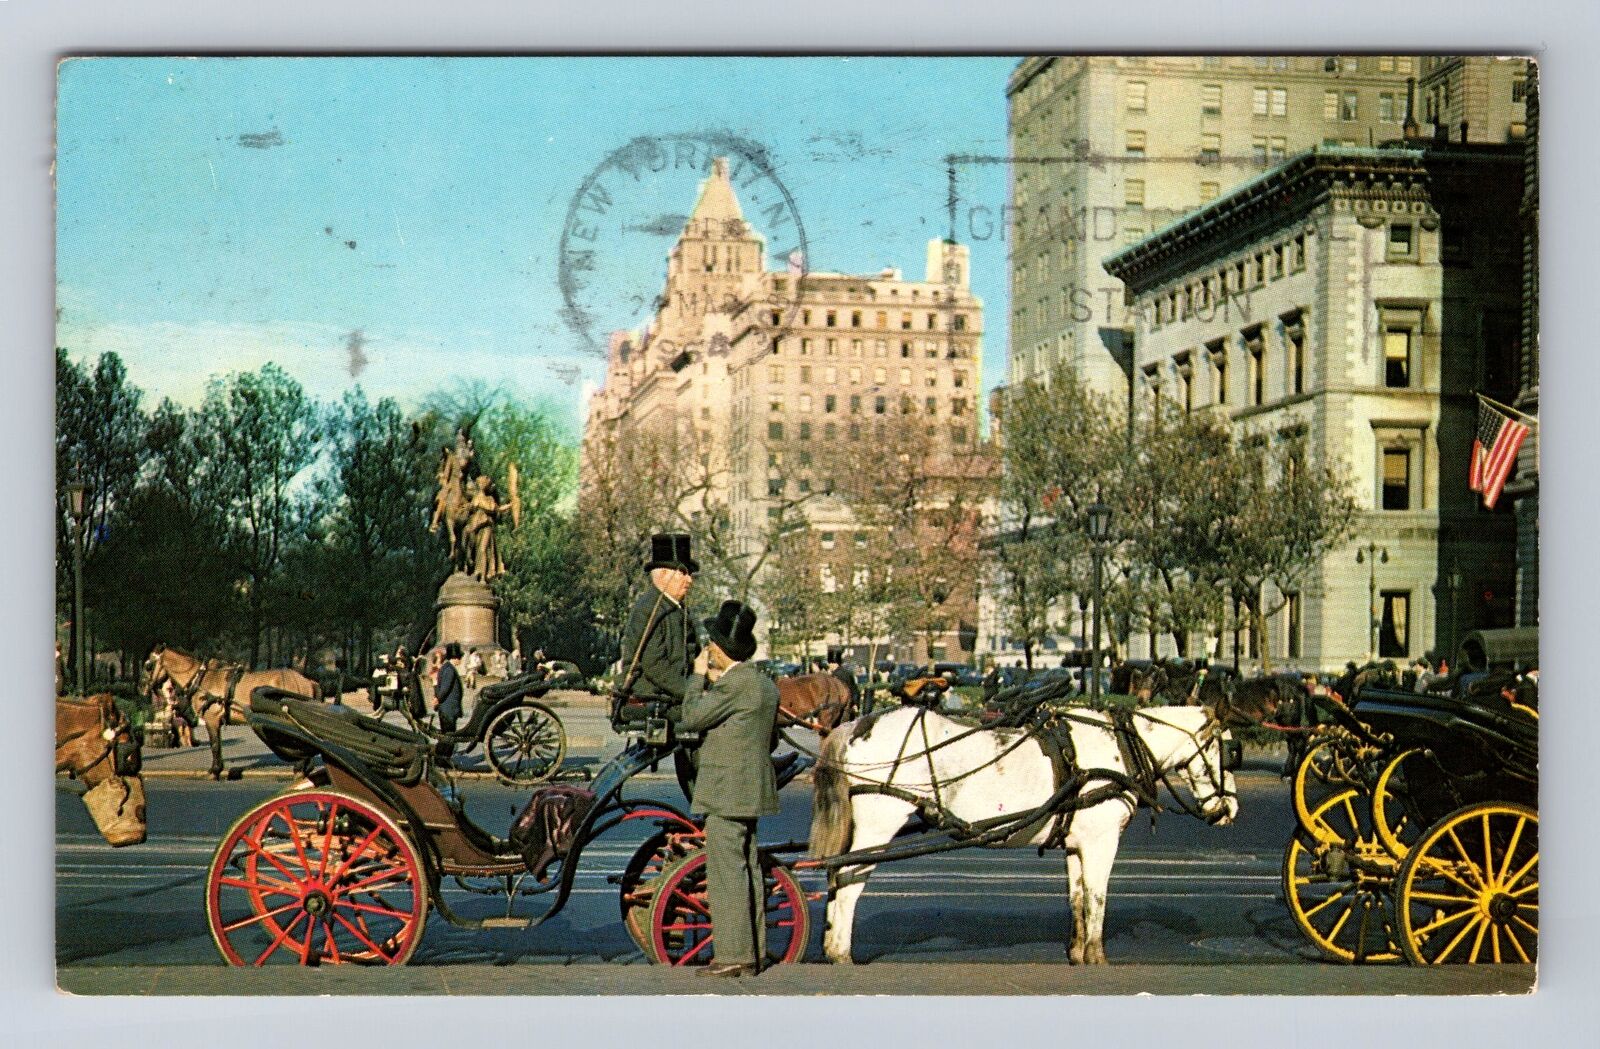 New York City NY-Carriages On 59th Street, Antique, Vintage c1914 Postcard